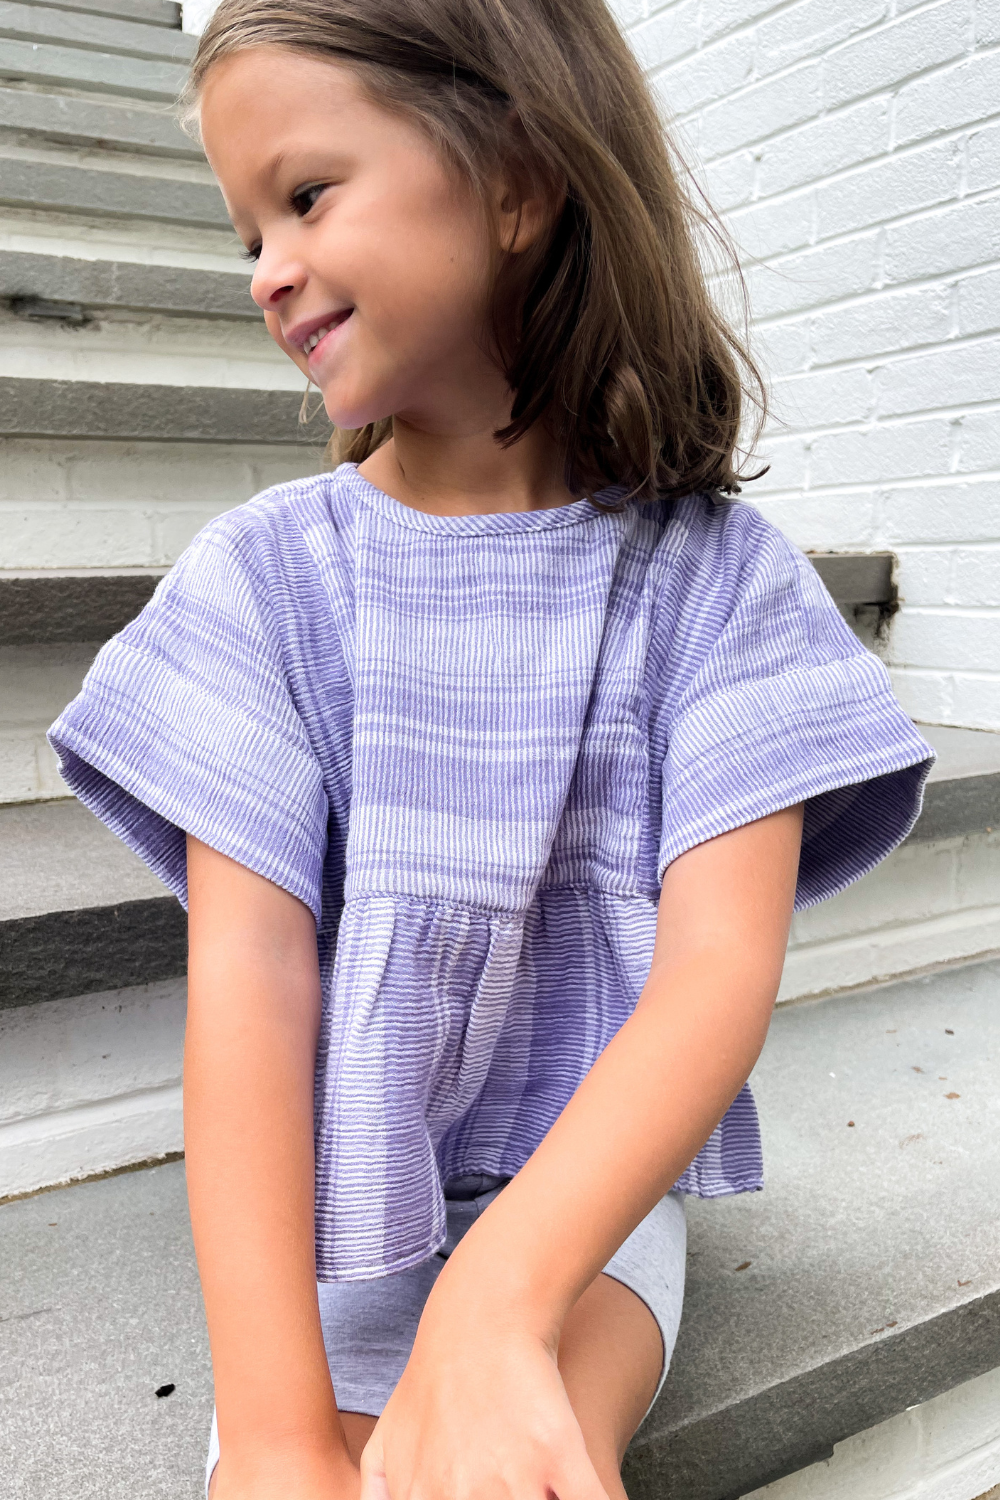 Suzanne's daughter posing in a purple peplum top 